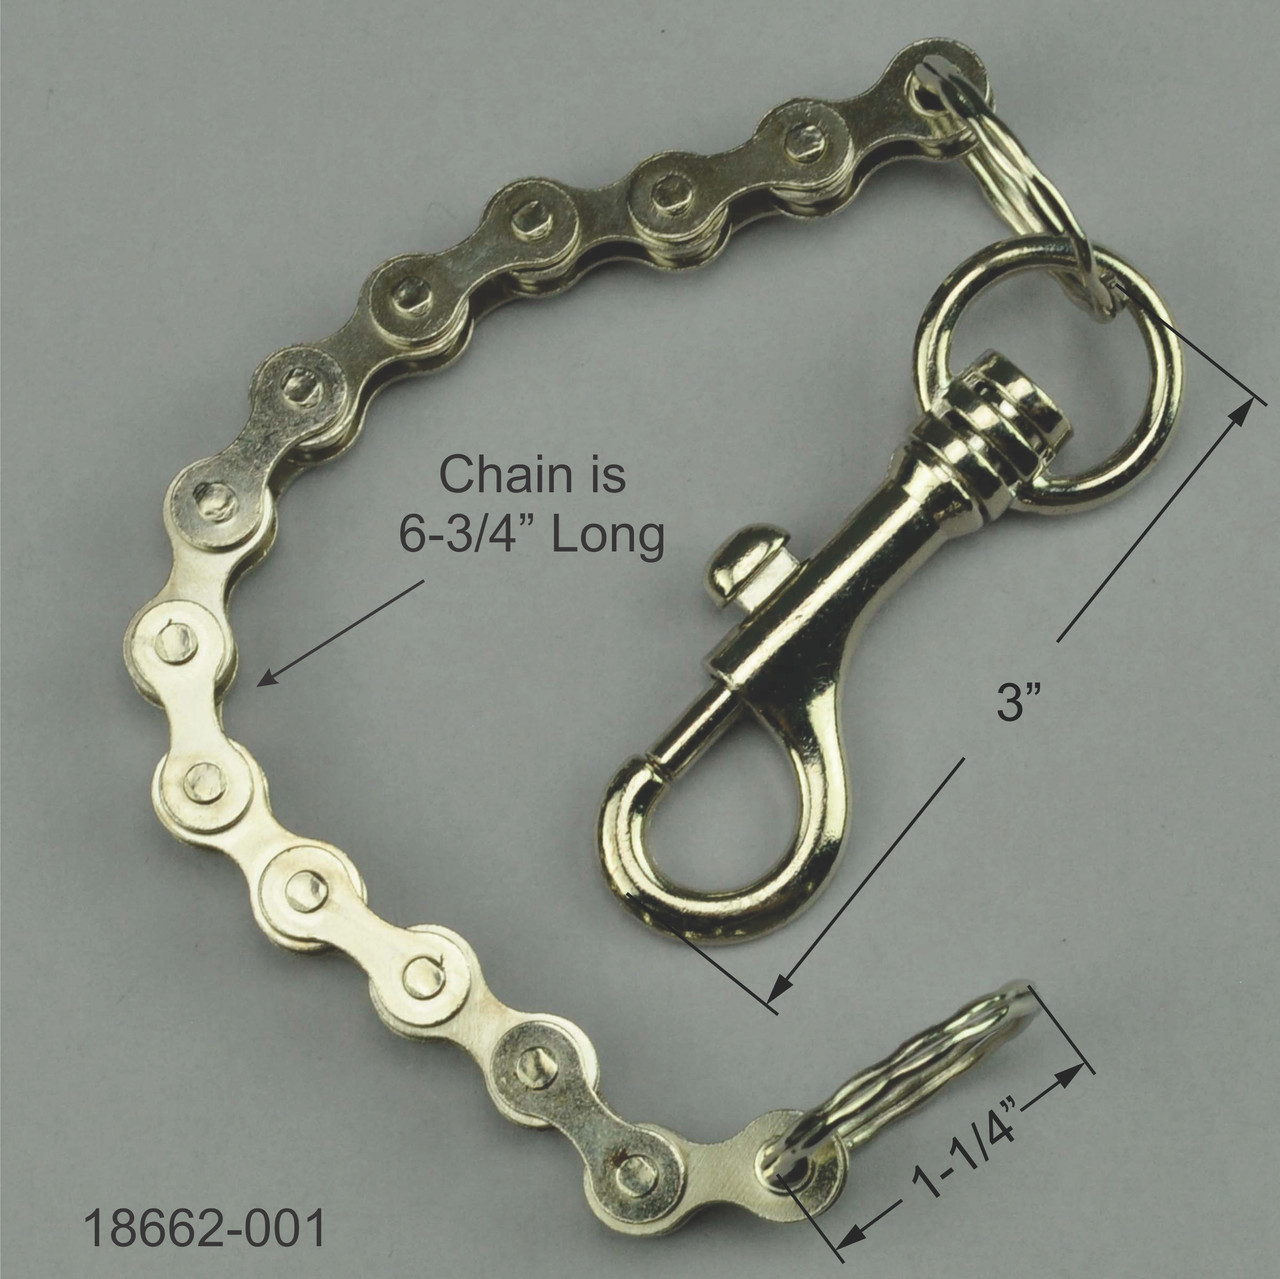 Shop for and Buy Bicycle Chain Keychain with Key Ring - Nickel Plated at  . Large selection and bulk discounts available.